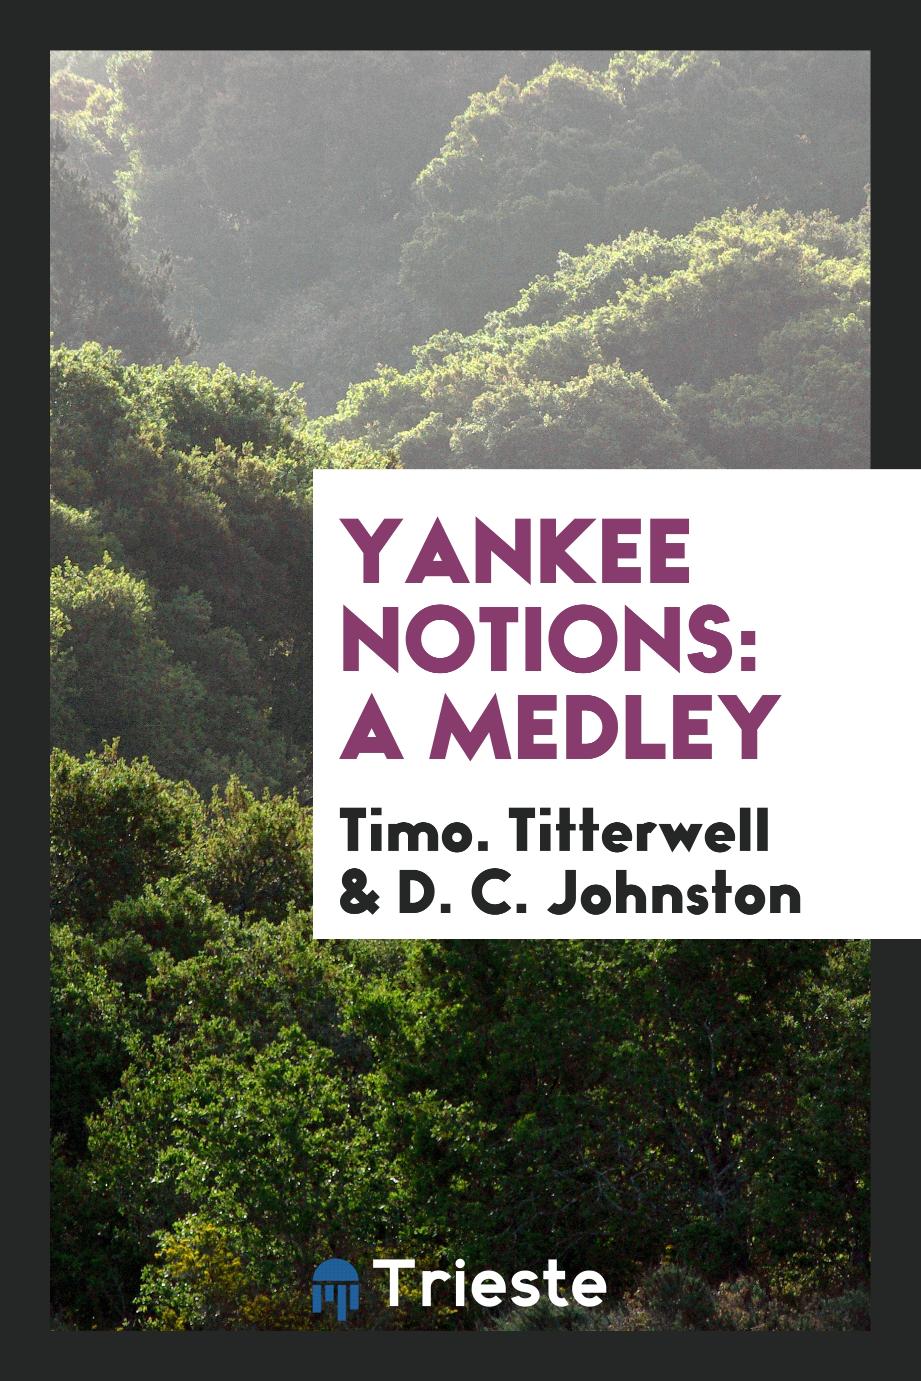 Yankee notions: a medley